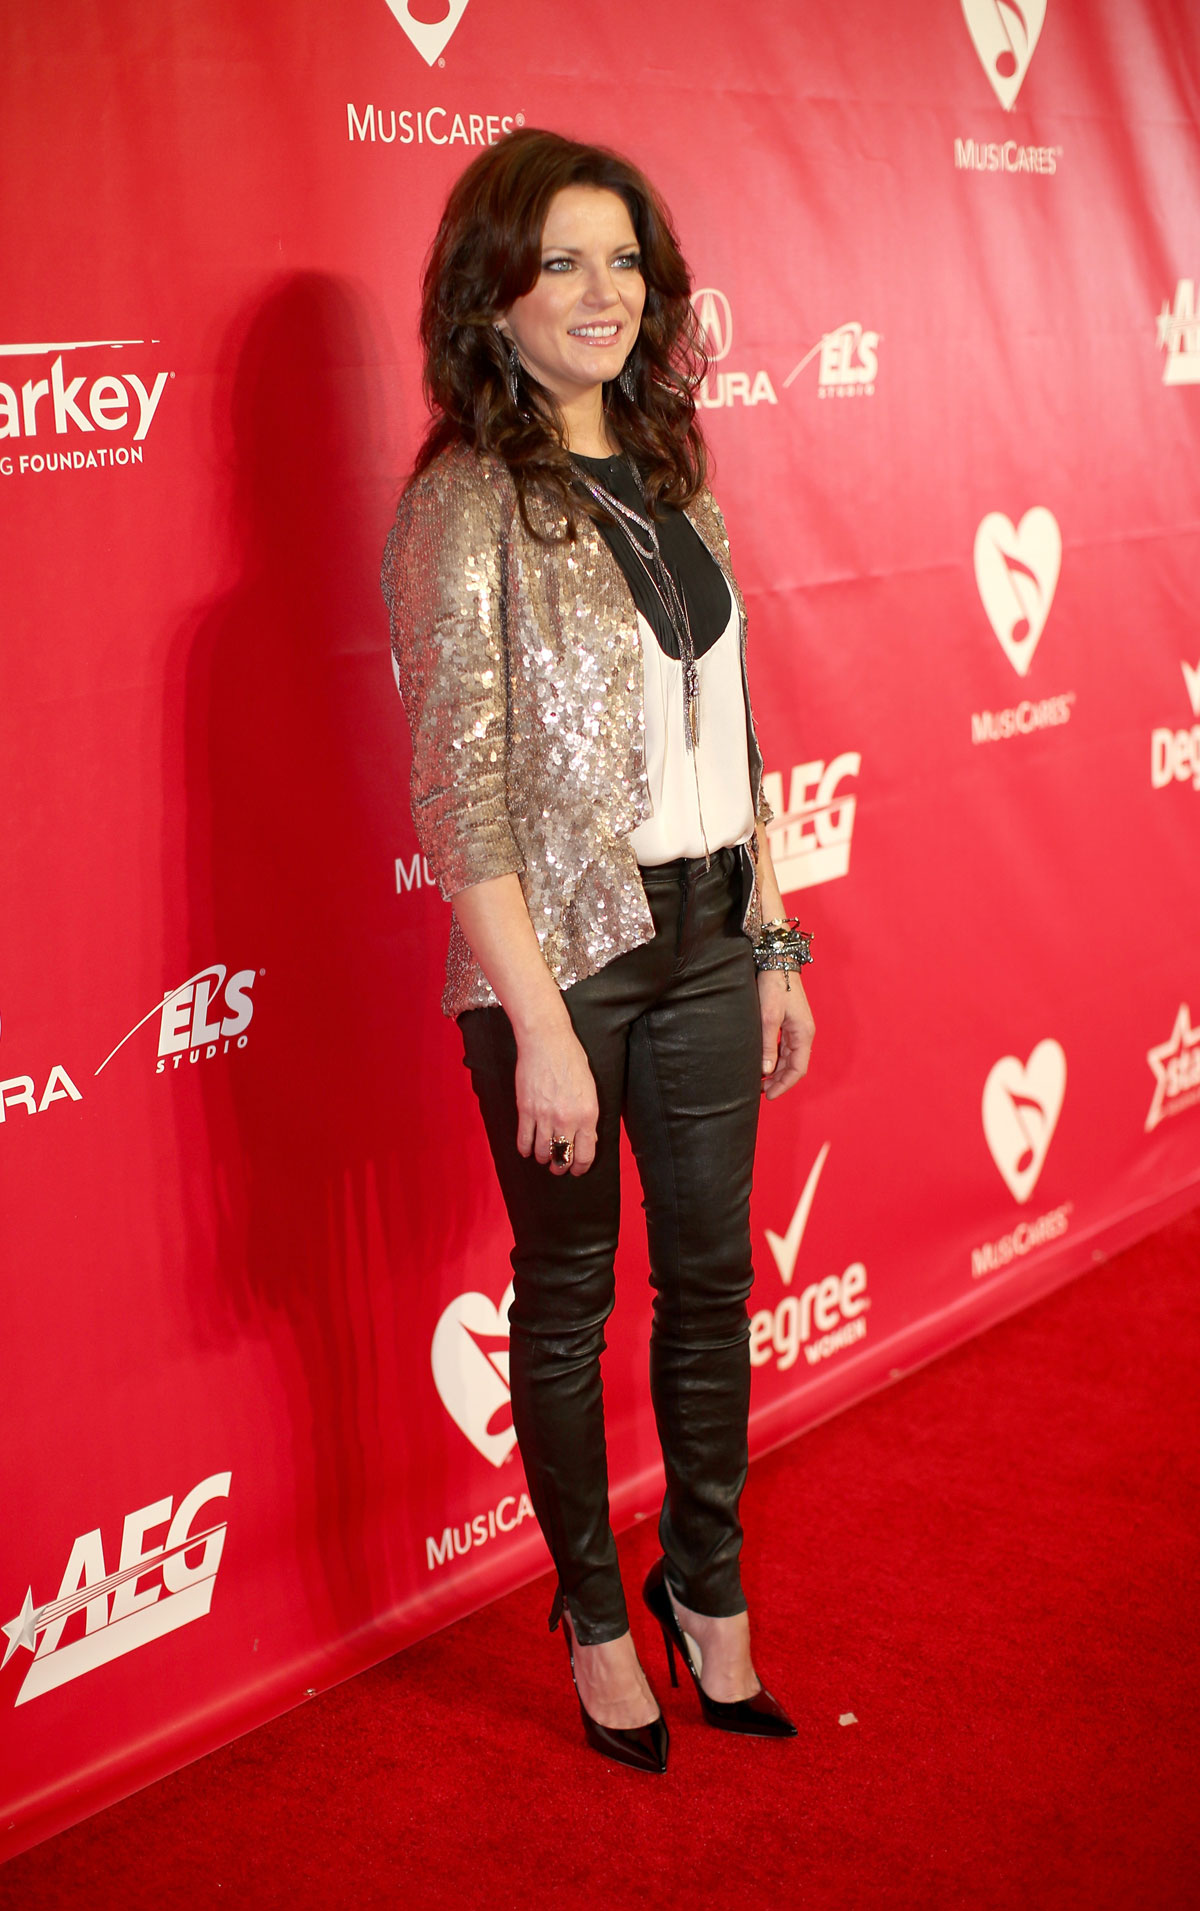 Martina McBride attends MusiCares Person Of The Year Honoring Carole King